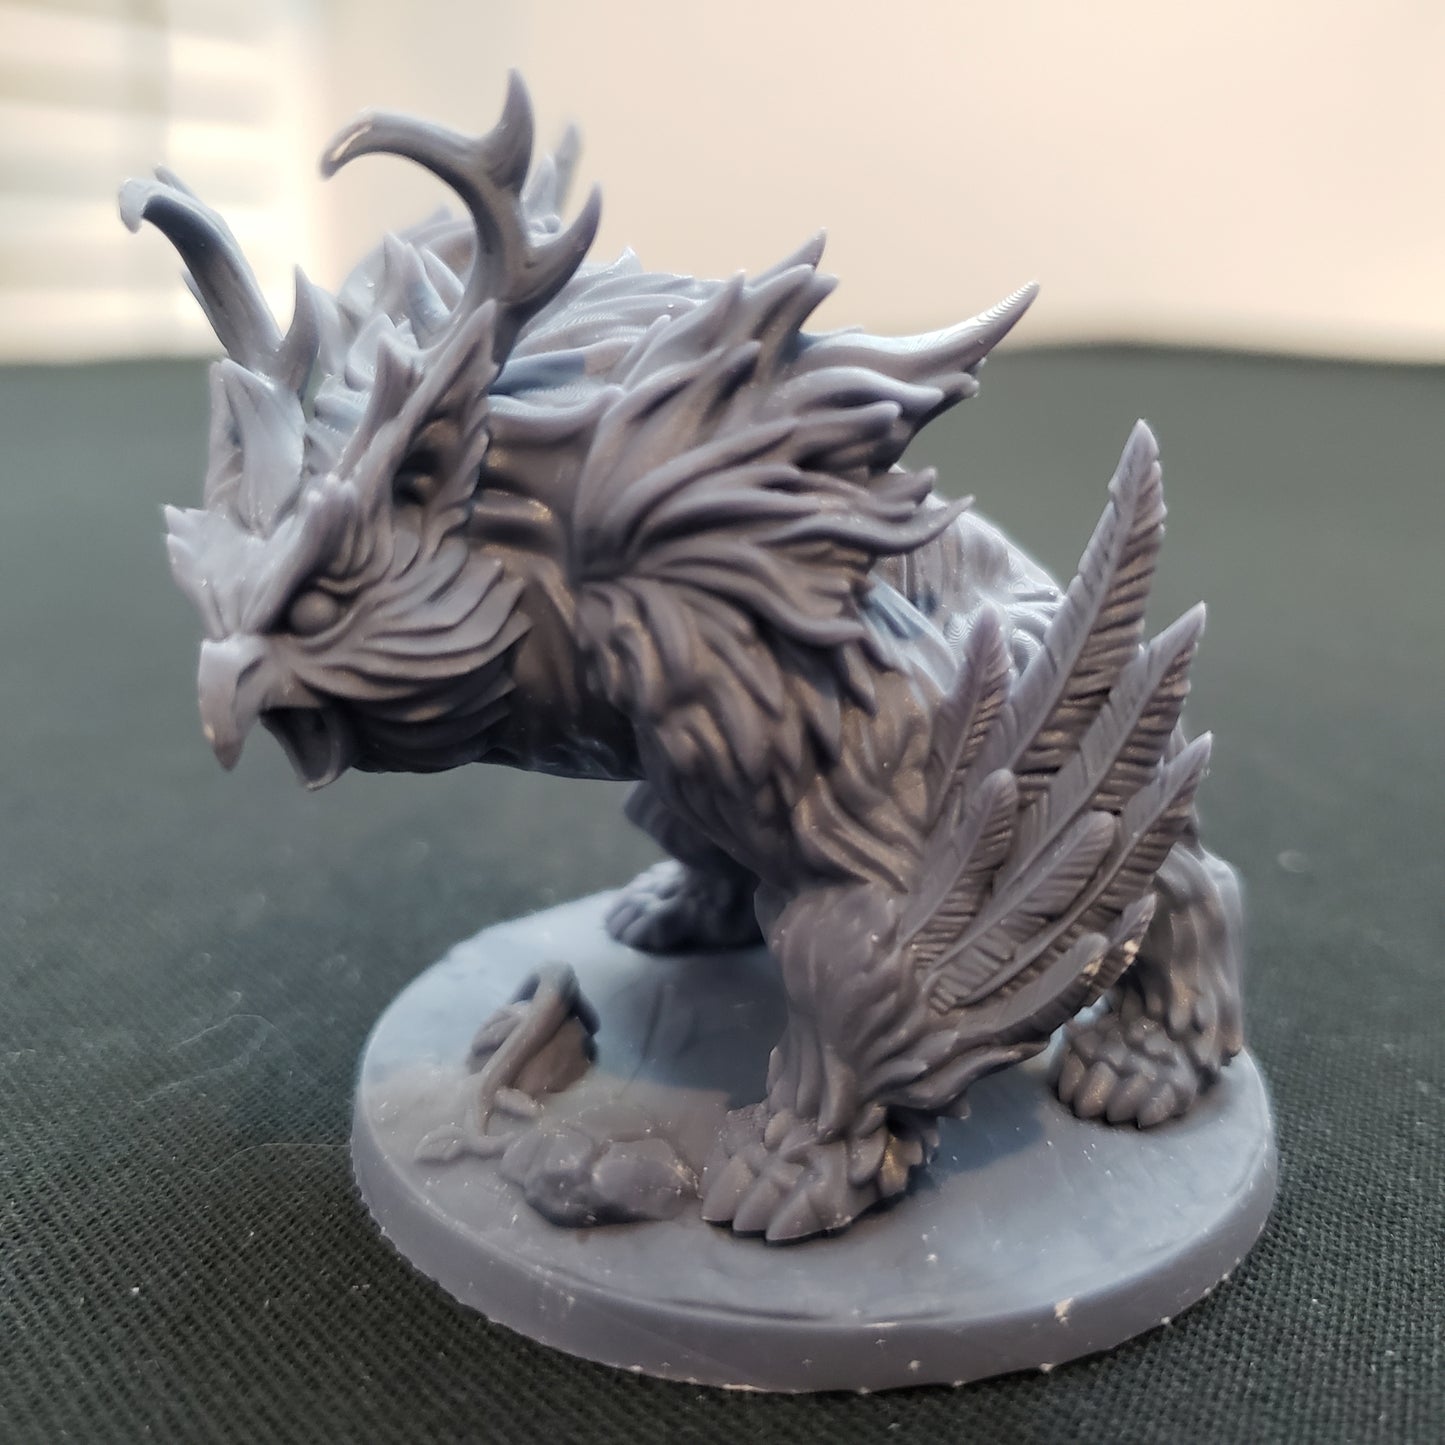 Image shows an example of a 3D printed owlbear miniature printed in-house at All Systems Go